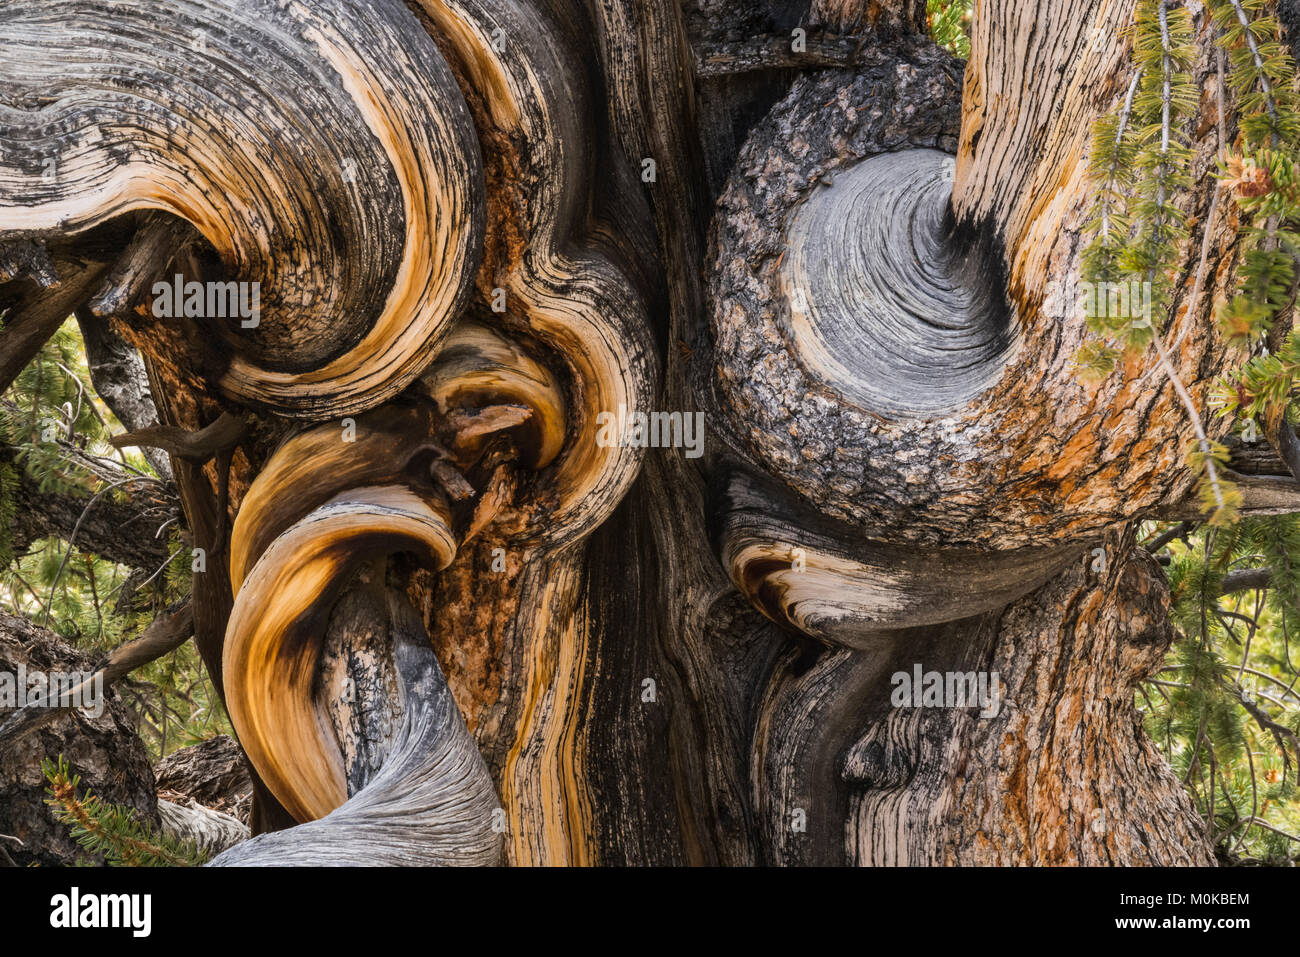 Close-up of a Bristlecone Pine tree, Bristlecone Pine National Forest; California, United States of America Stock Photo